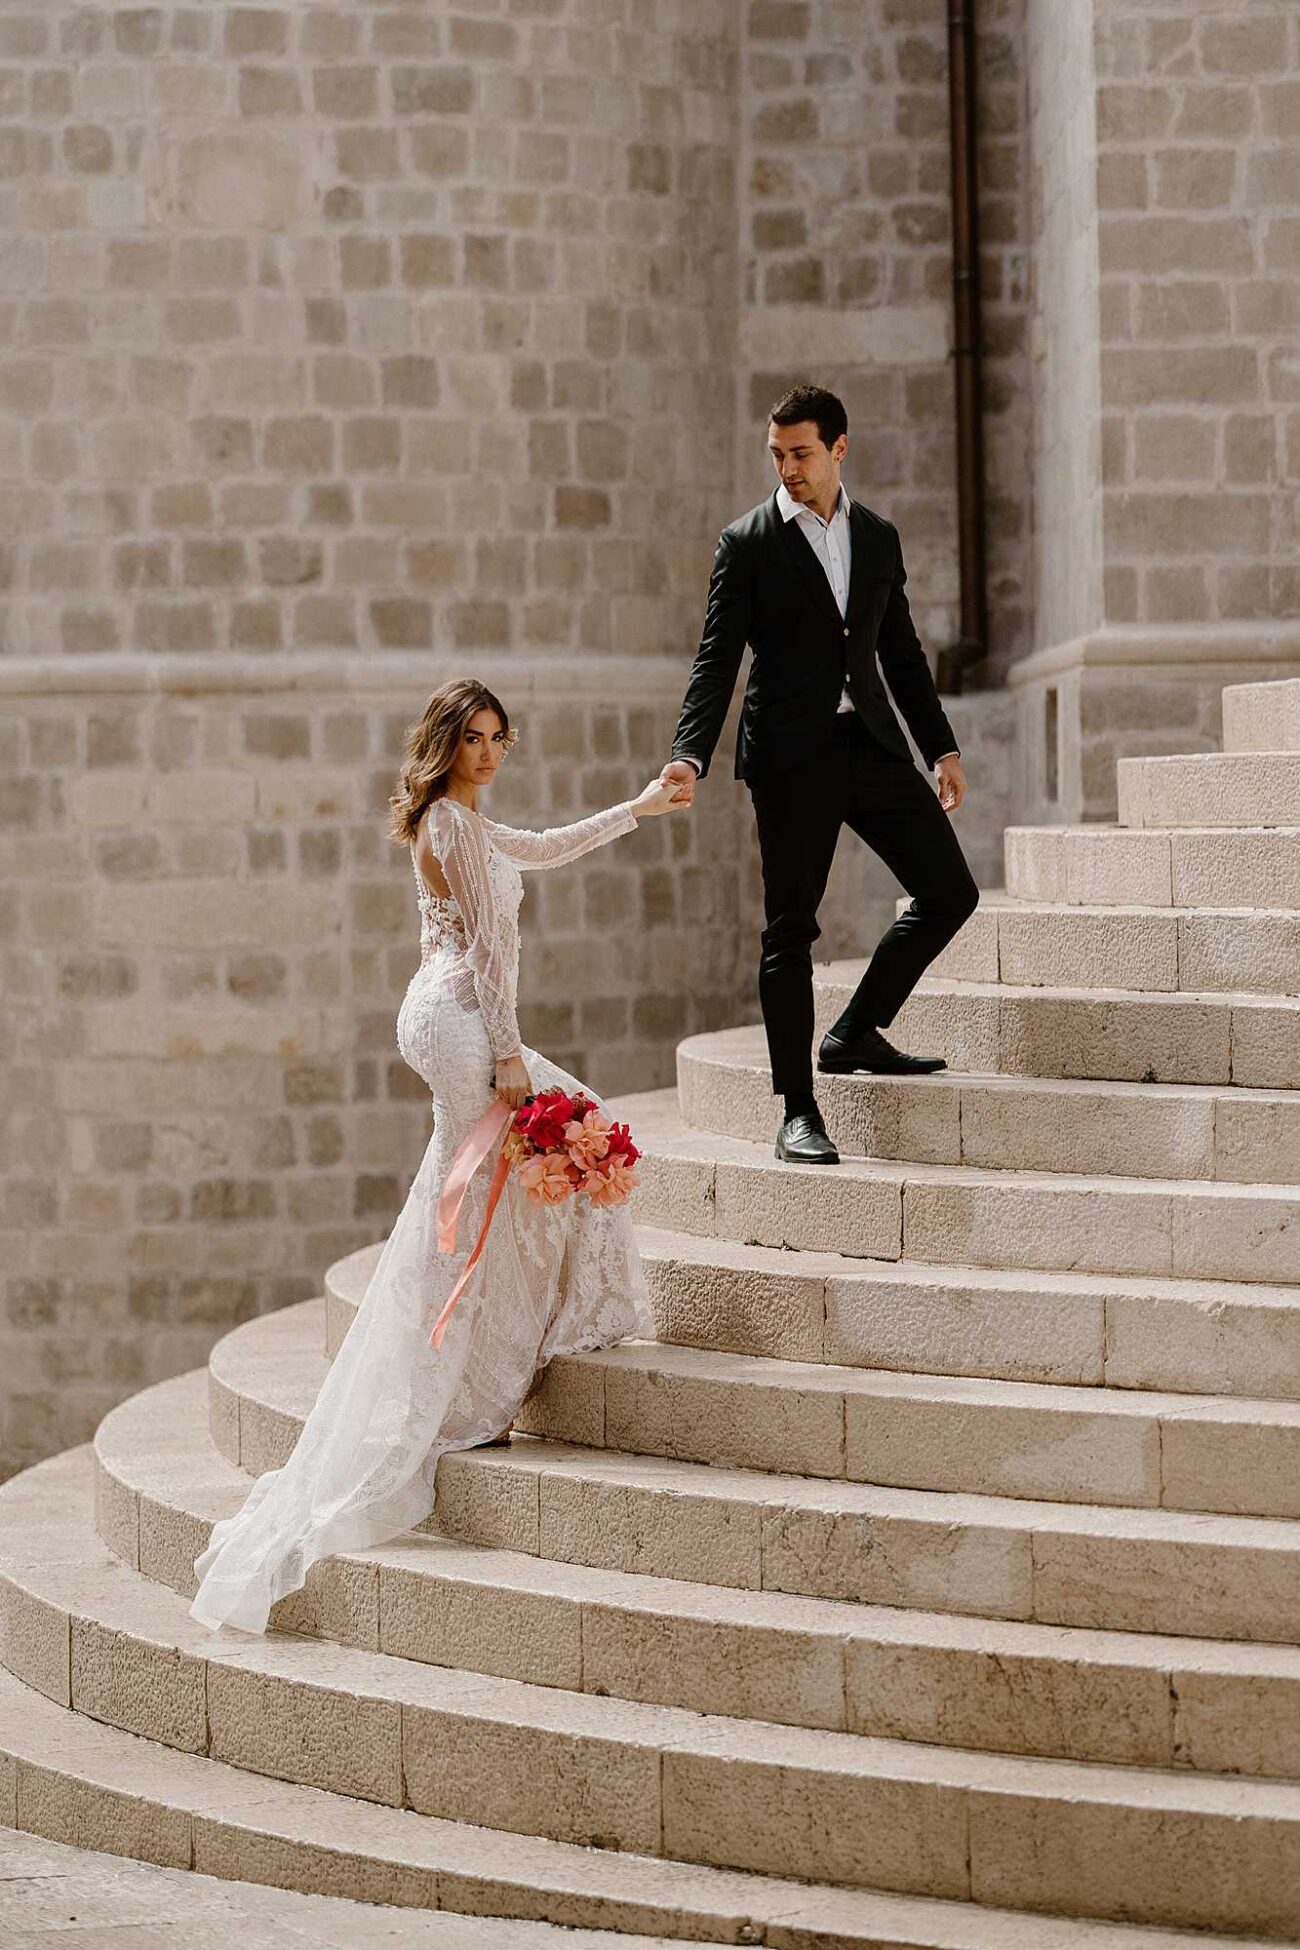 Dubrovnik wedding elopement with Luucana and Marin